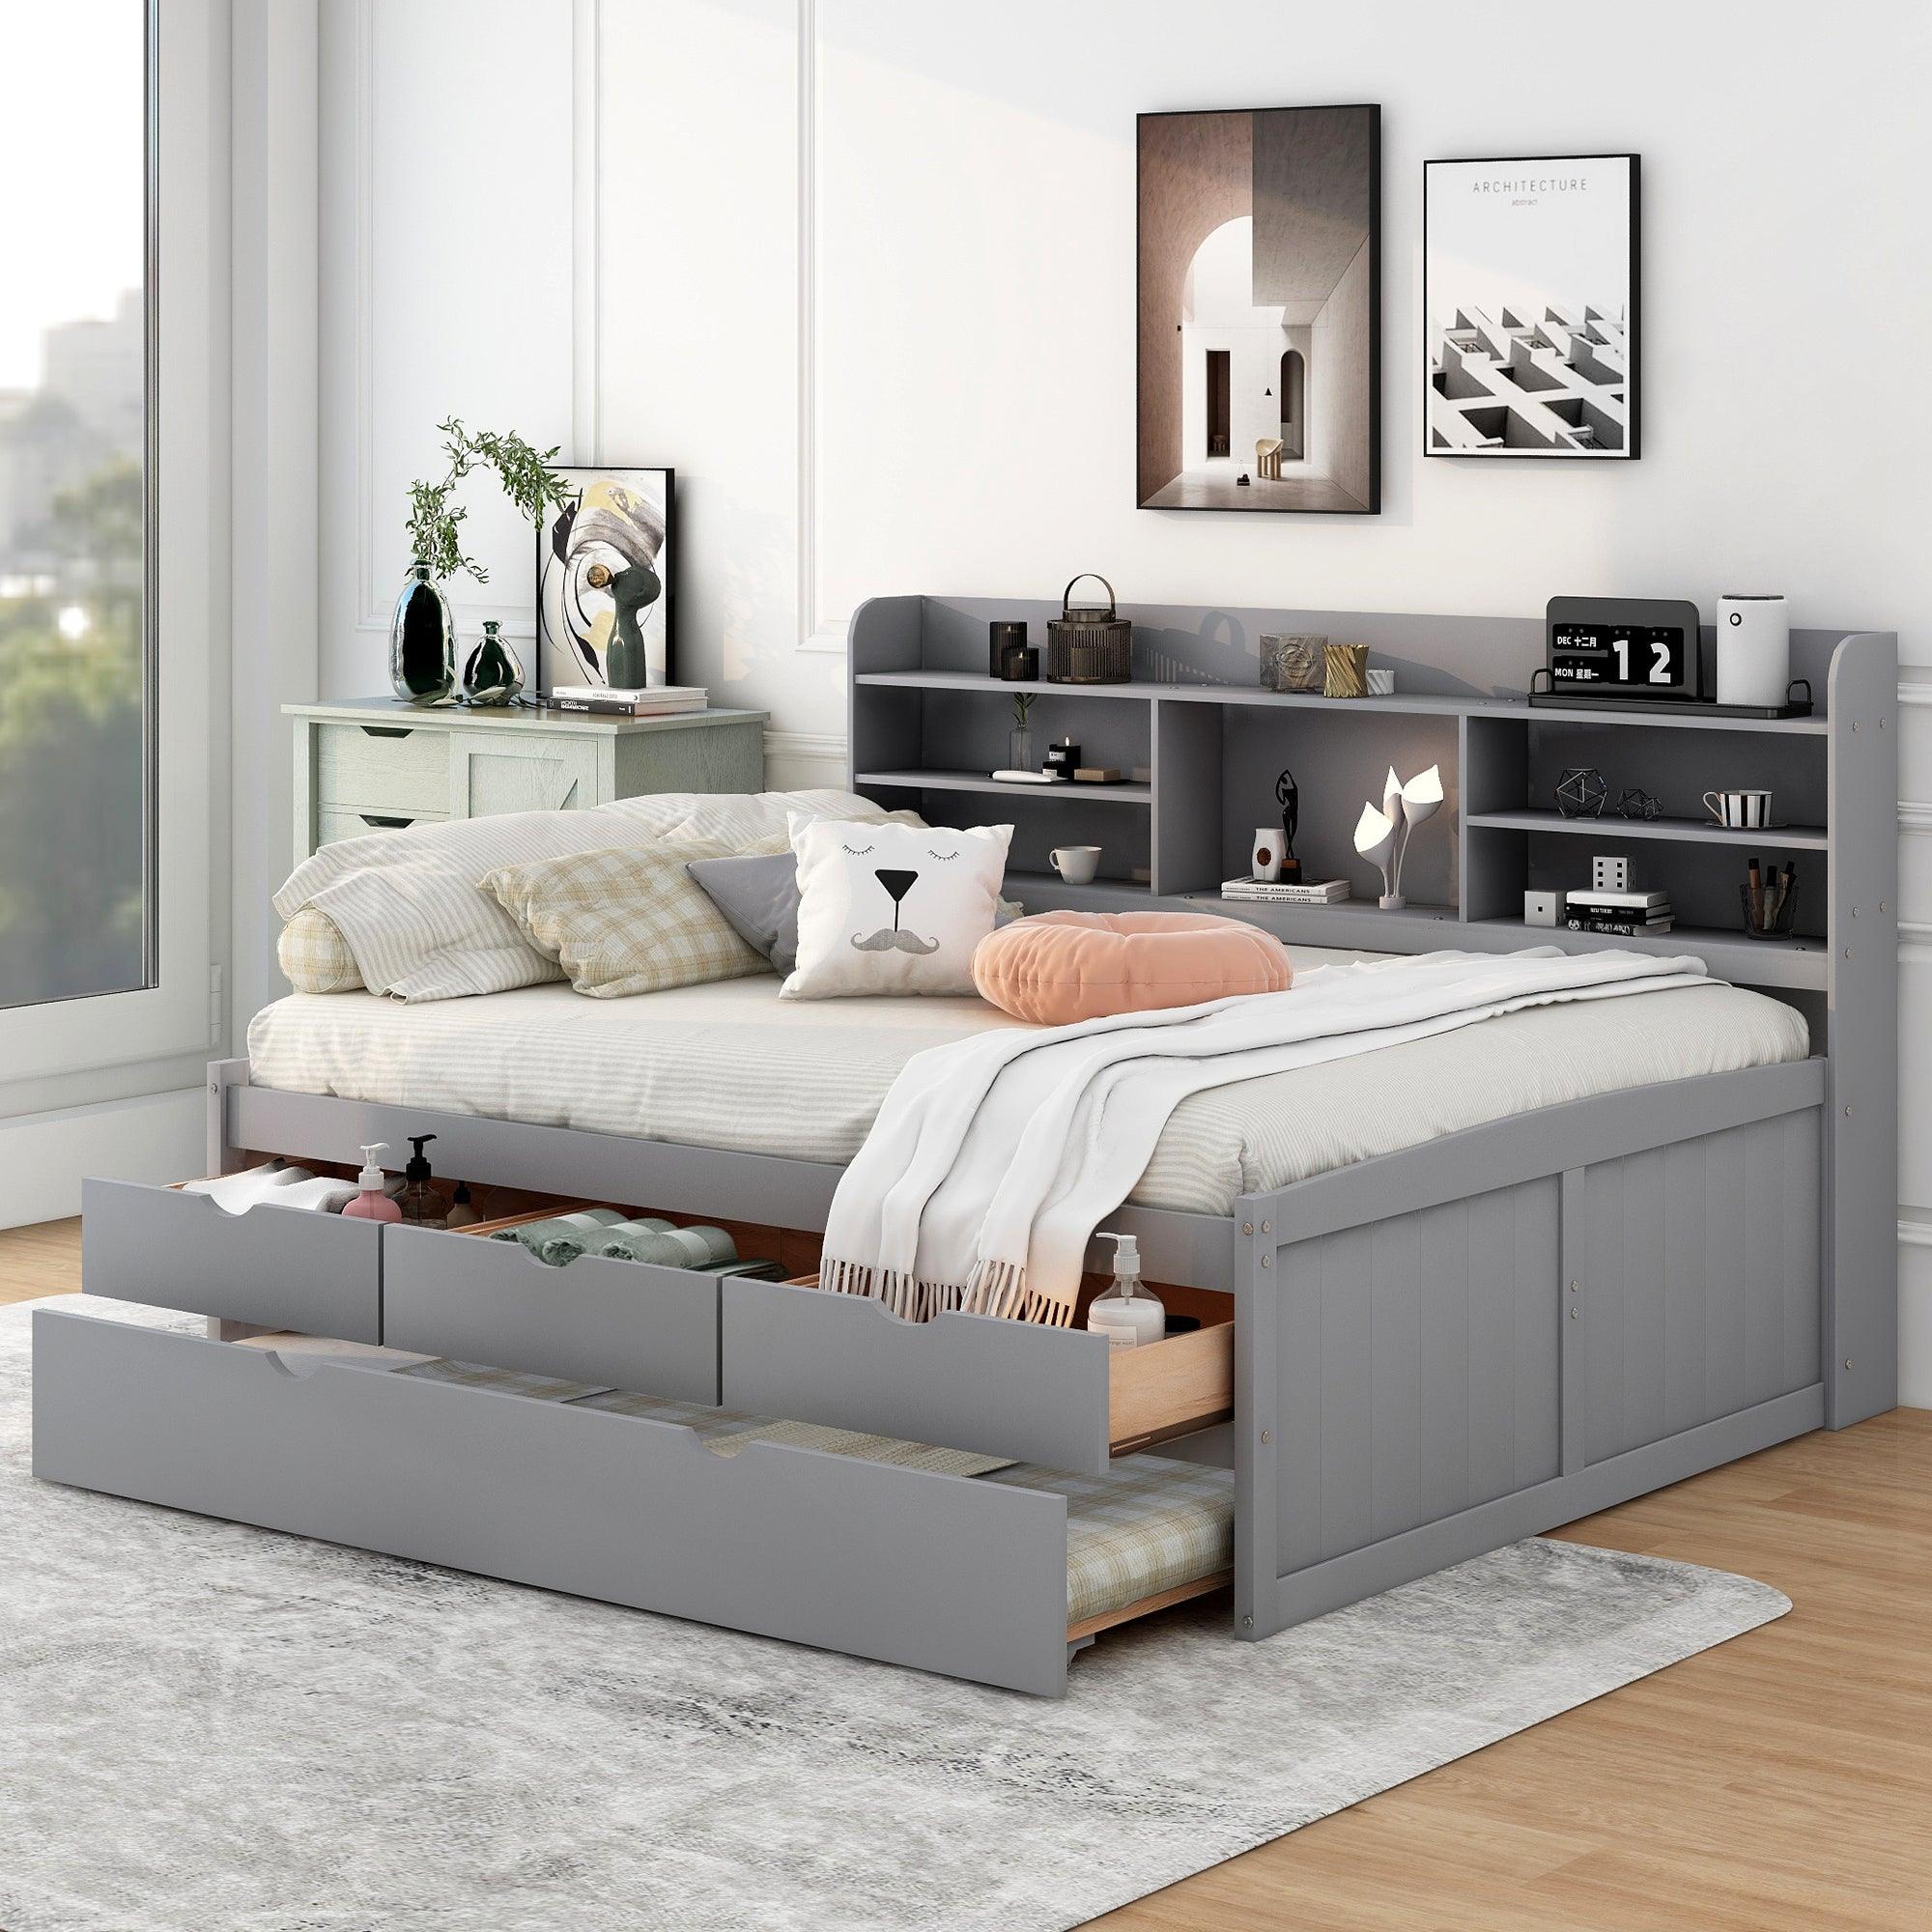 🆓🚛 Full Size Wooden Captain Bed With Built-in Bookshelves, Three Storage Drawers and Trundle, Light Gray